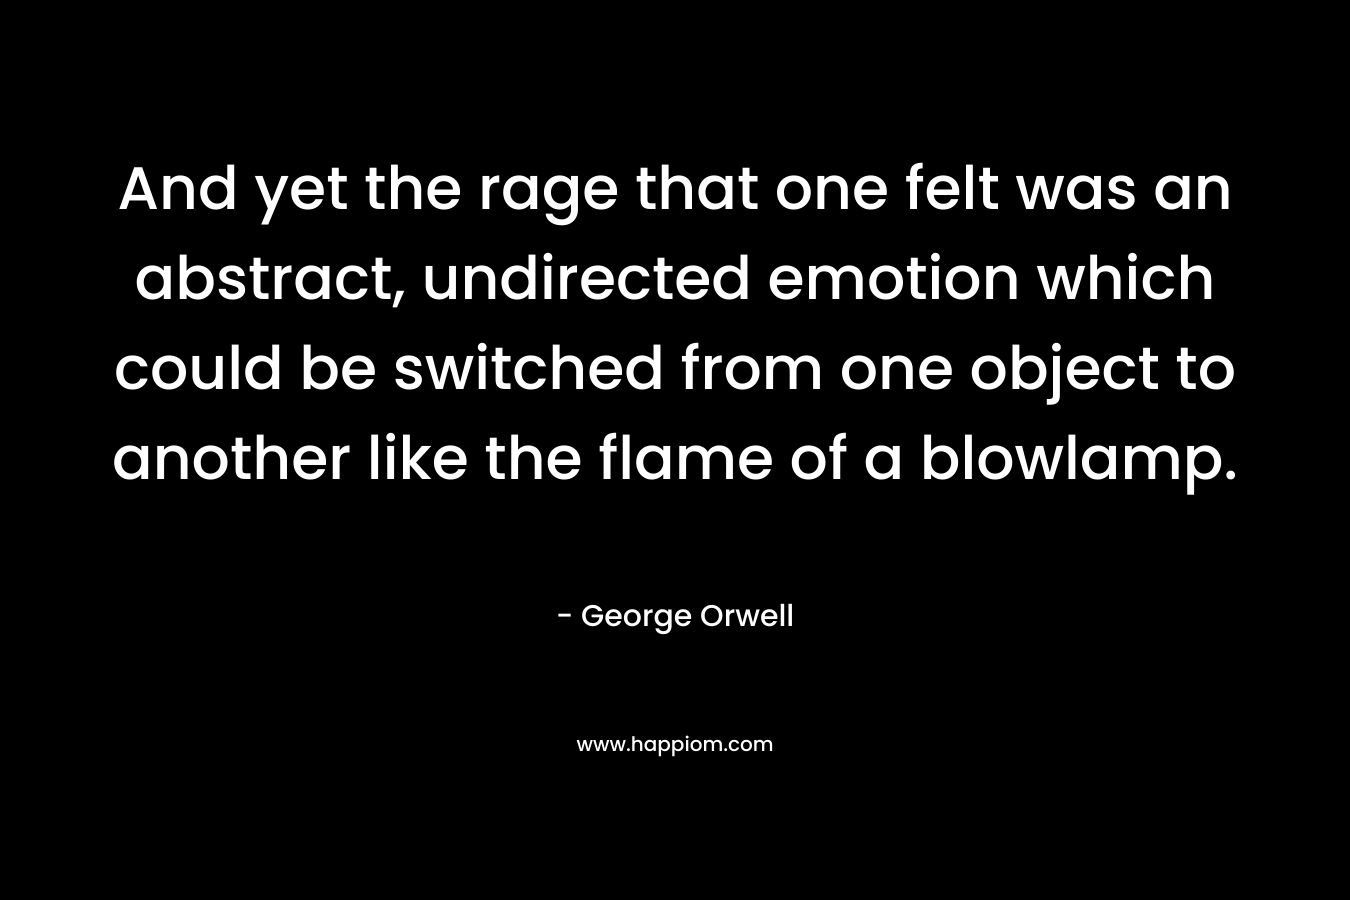 And yet the rage that one felt was an abstract, undirected emotion which could be switched from one object to another like the flame of a blowlamp. – George Orwell